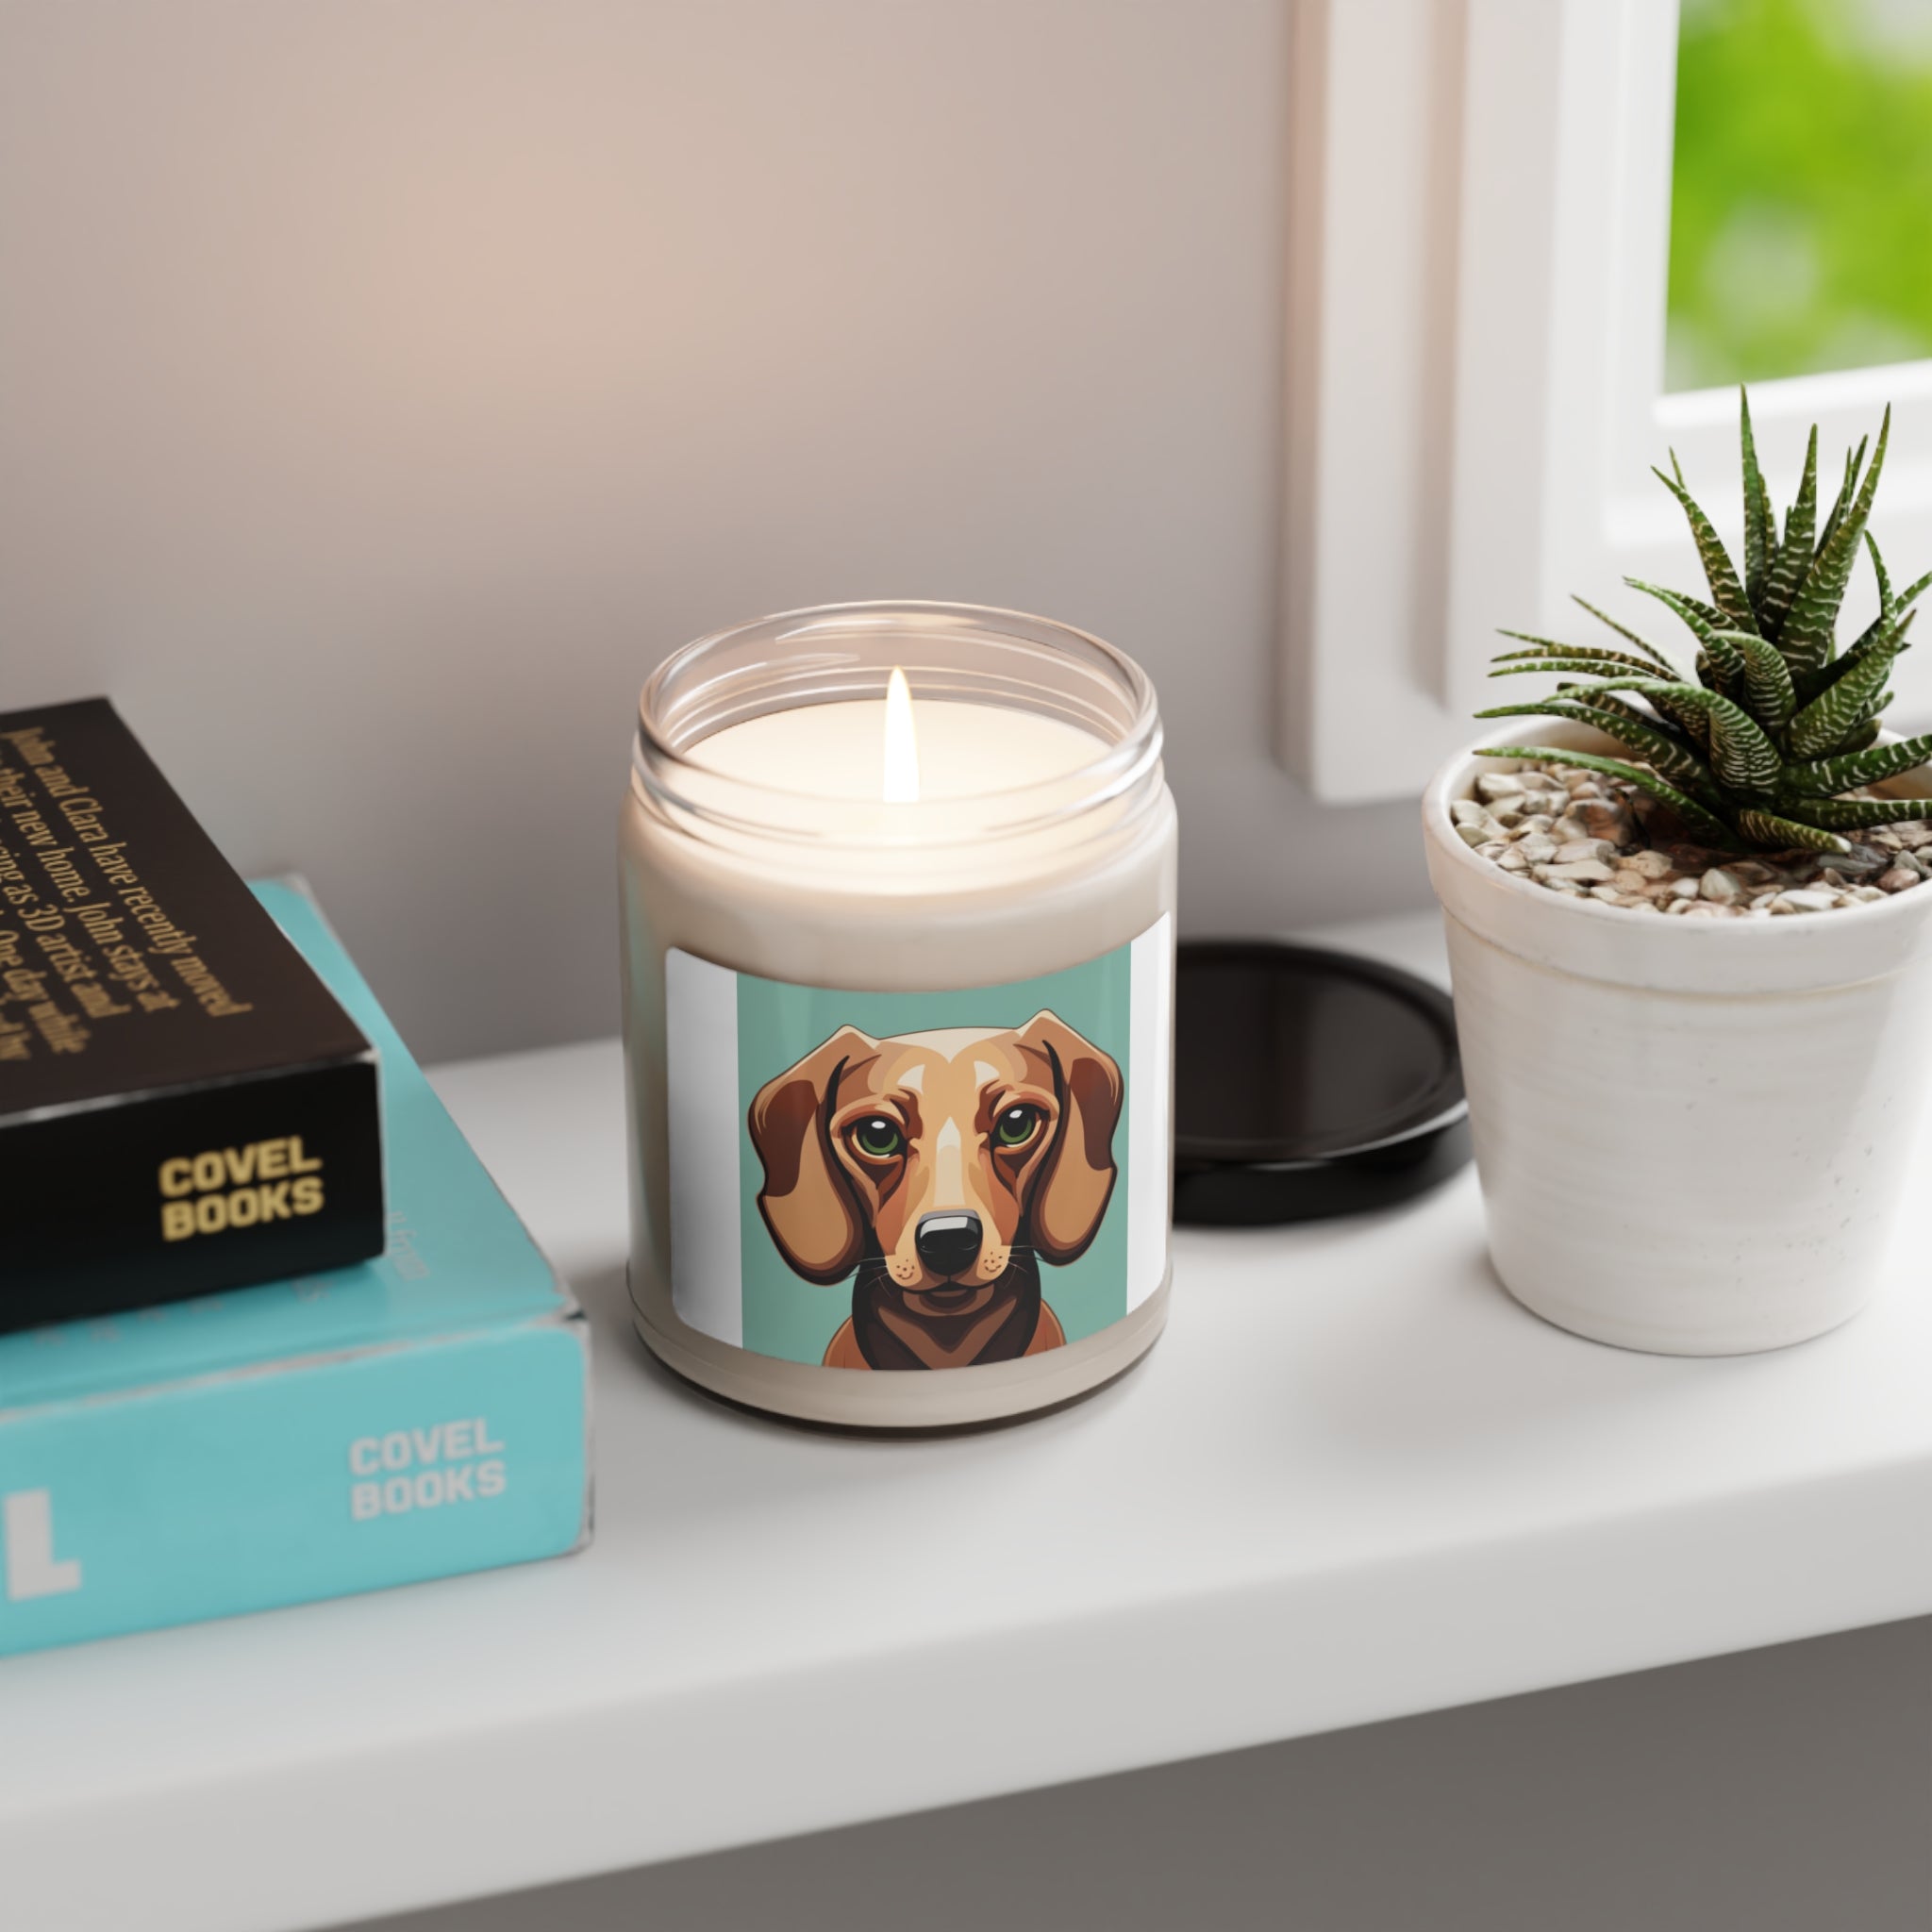 Dachshund Candle Scented Soy Candle, 255g